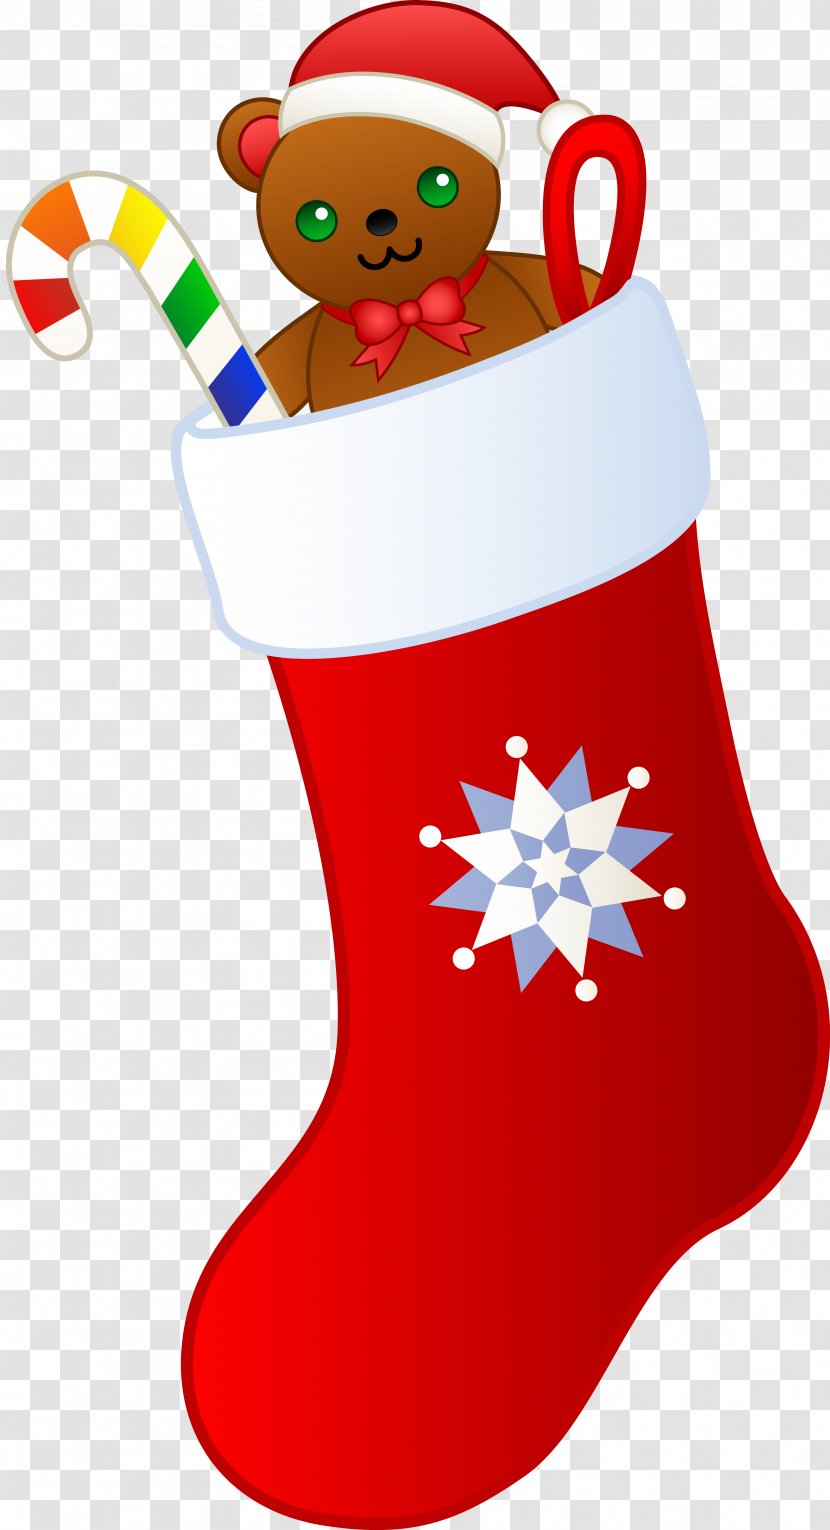 Candy Cane Christmas Stocking Free Content Clip Art - Snowman - Stockings Pictures Transparent PNG